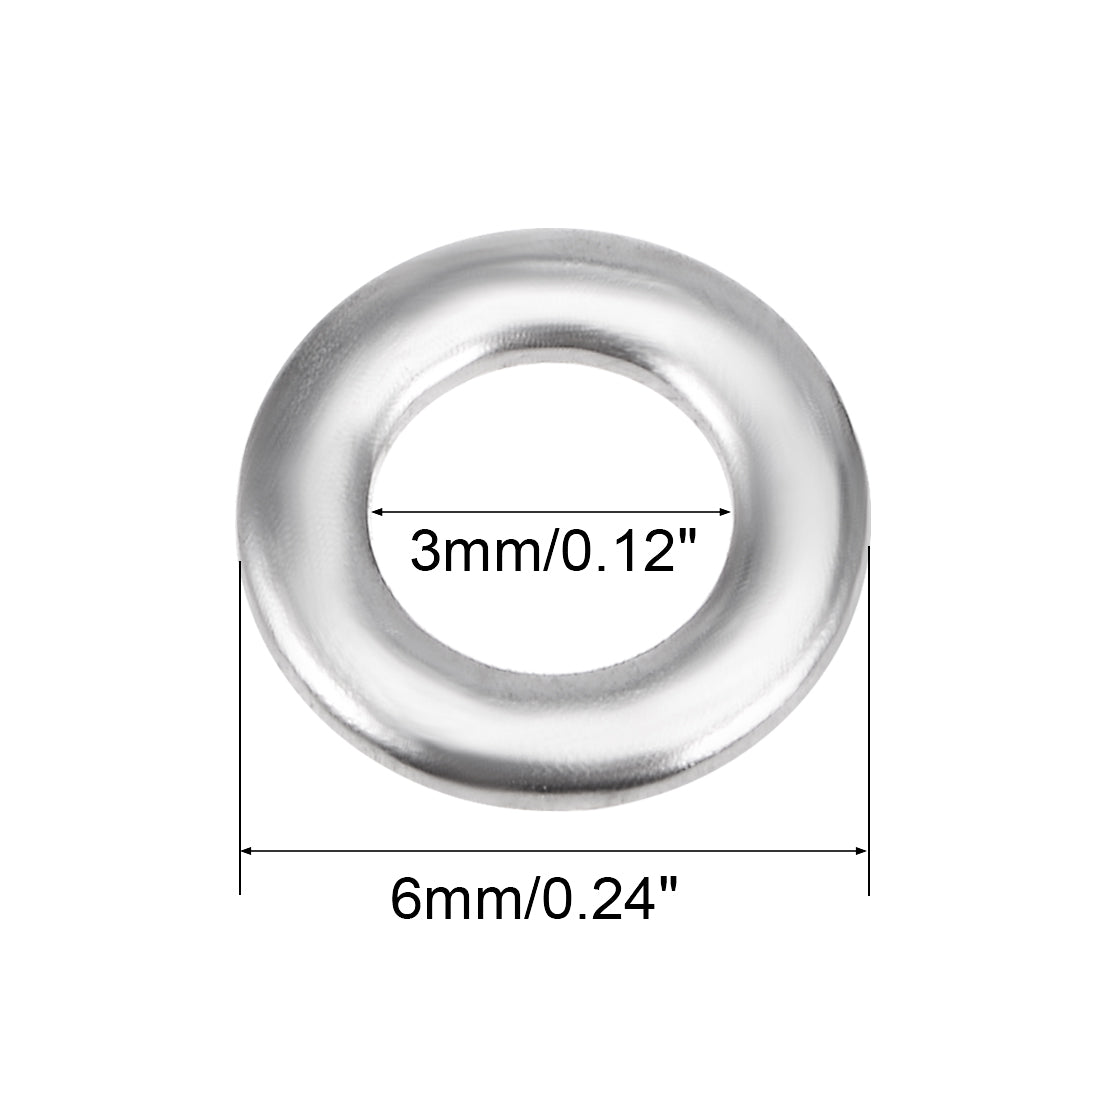 uxcell Uxcell 100 Pcs 6mm x 3mm x 0.8mm 304 Stainless Steel Flat Washer for Screw Bolt